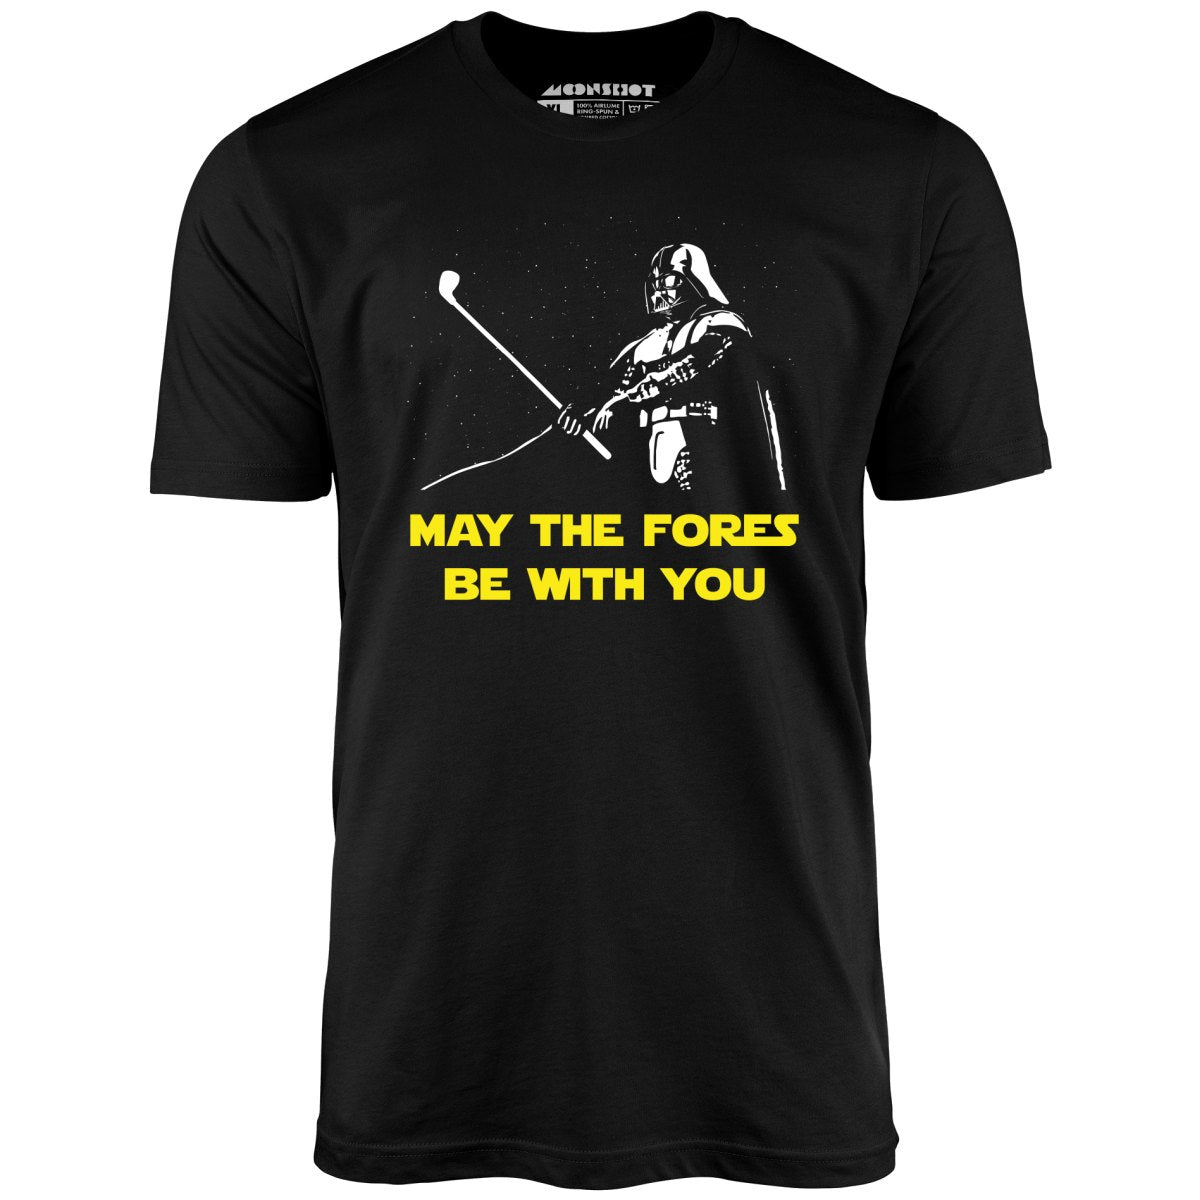 May The Fores Be With You - Unisex T-Shirt